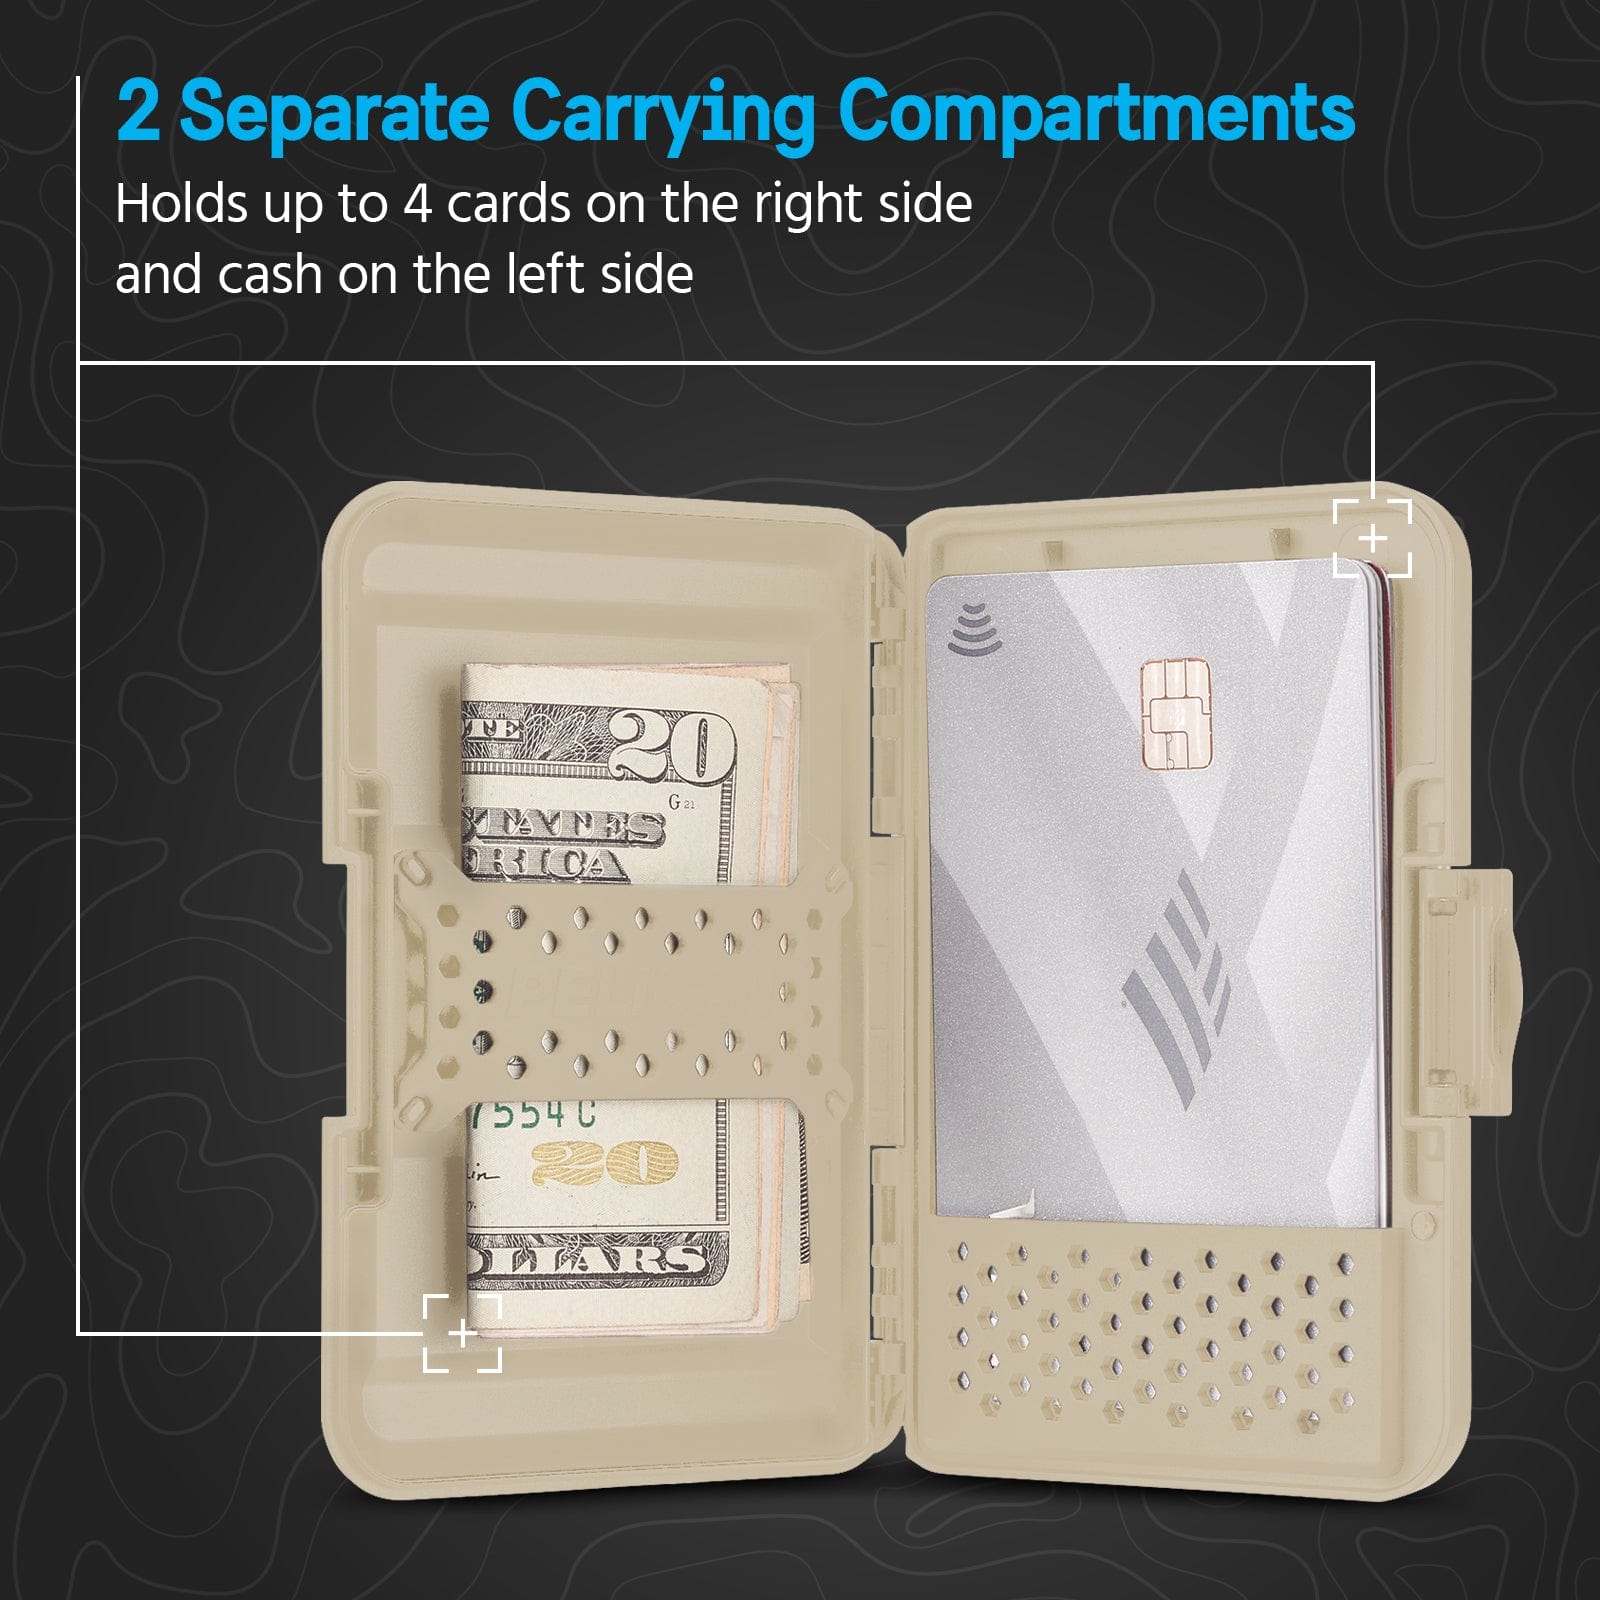 2 SEPARATE CARRYING COMPARTMENTS. HOLDS UP TO 4 CARDS ON THE RIGHT SIDE AND CASH ON THE LEFT SIDE. 